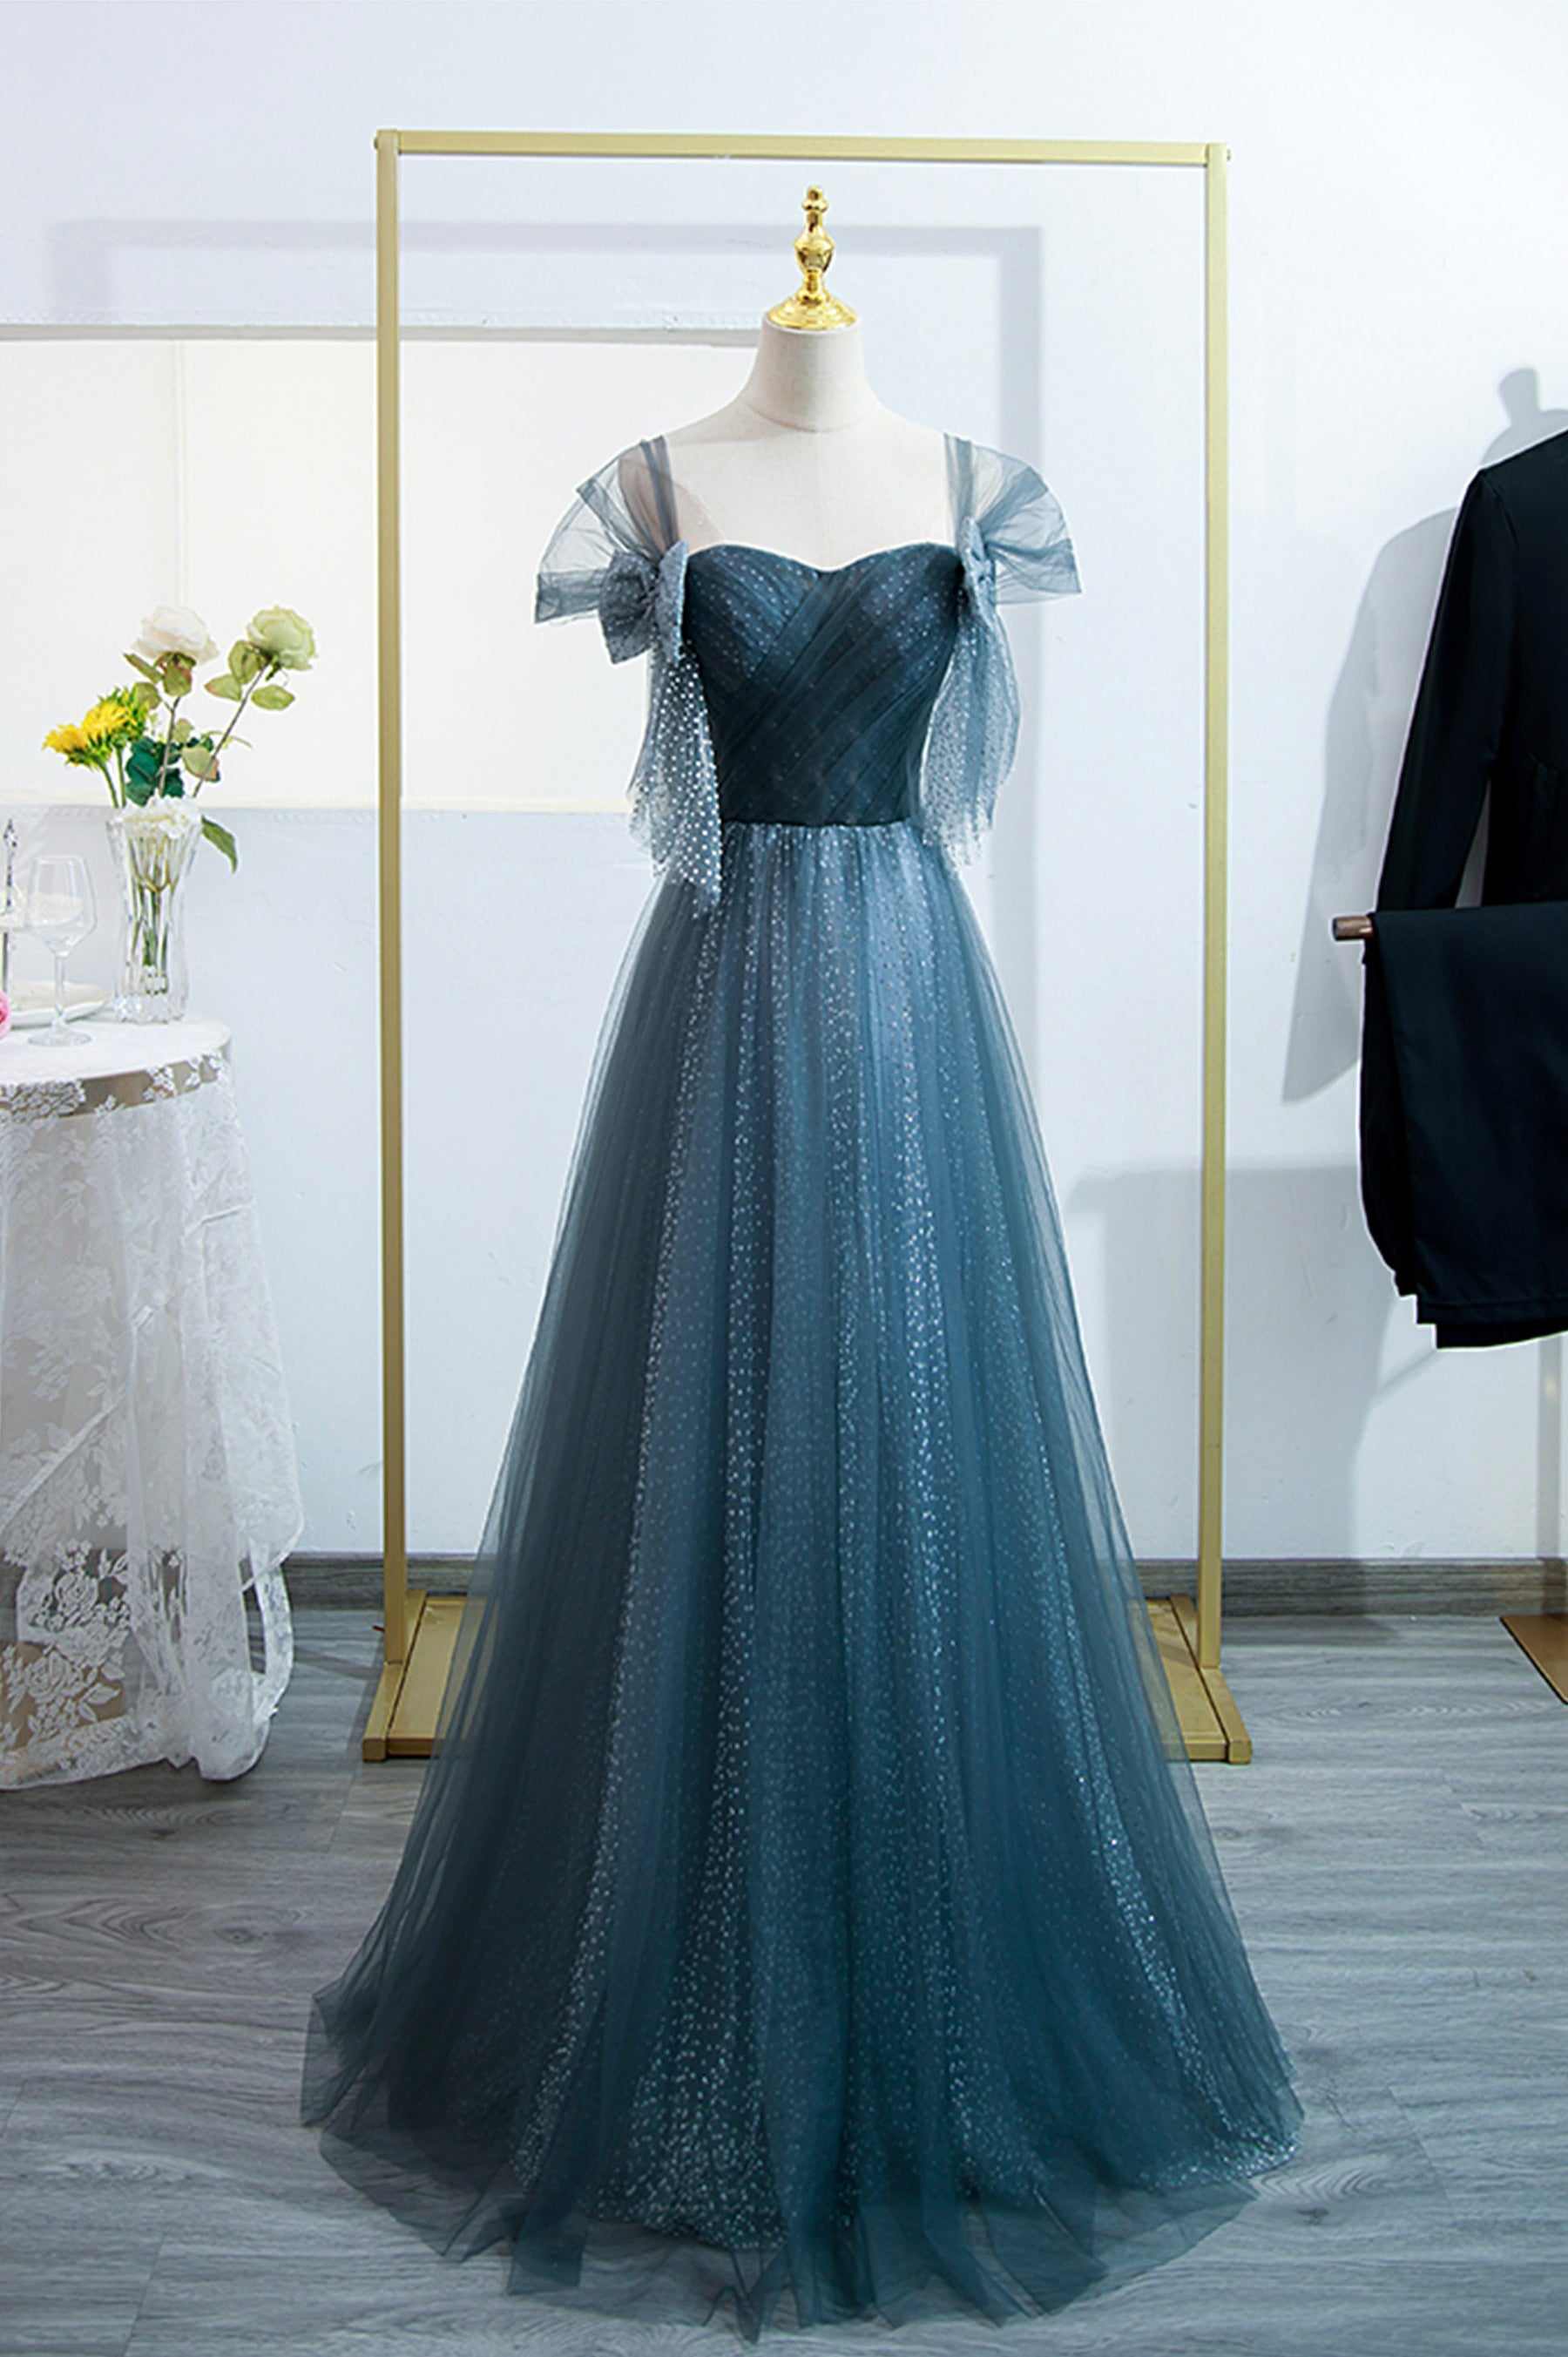 Blue Tulle Long A-Line Prom Dress, Simple Sweetheart Neckline Evening Party Dress